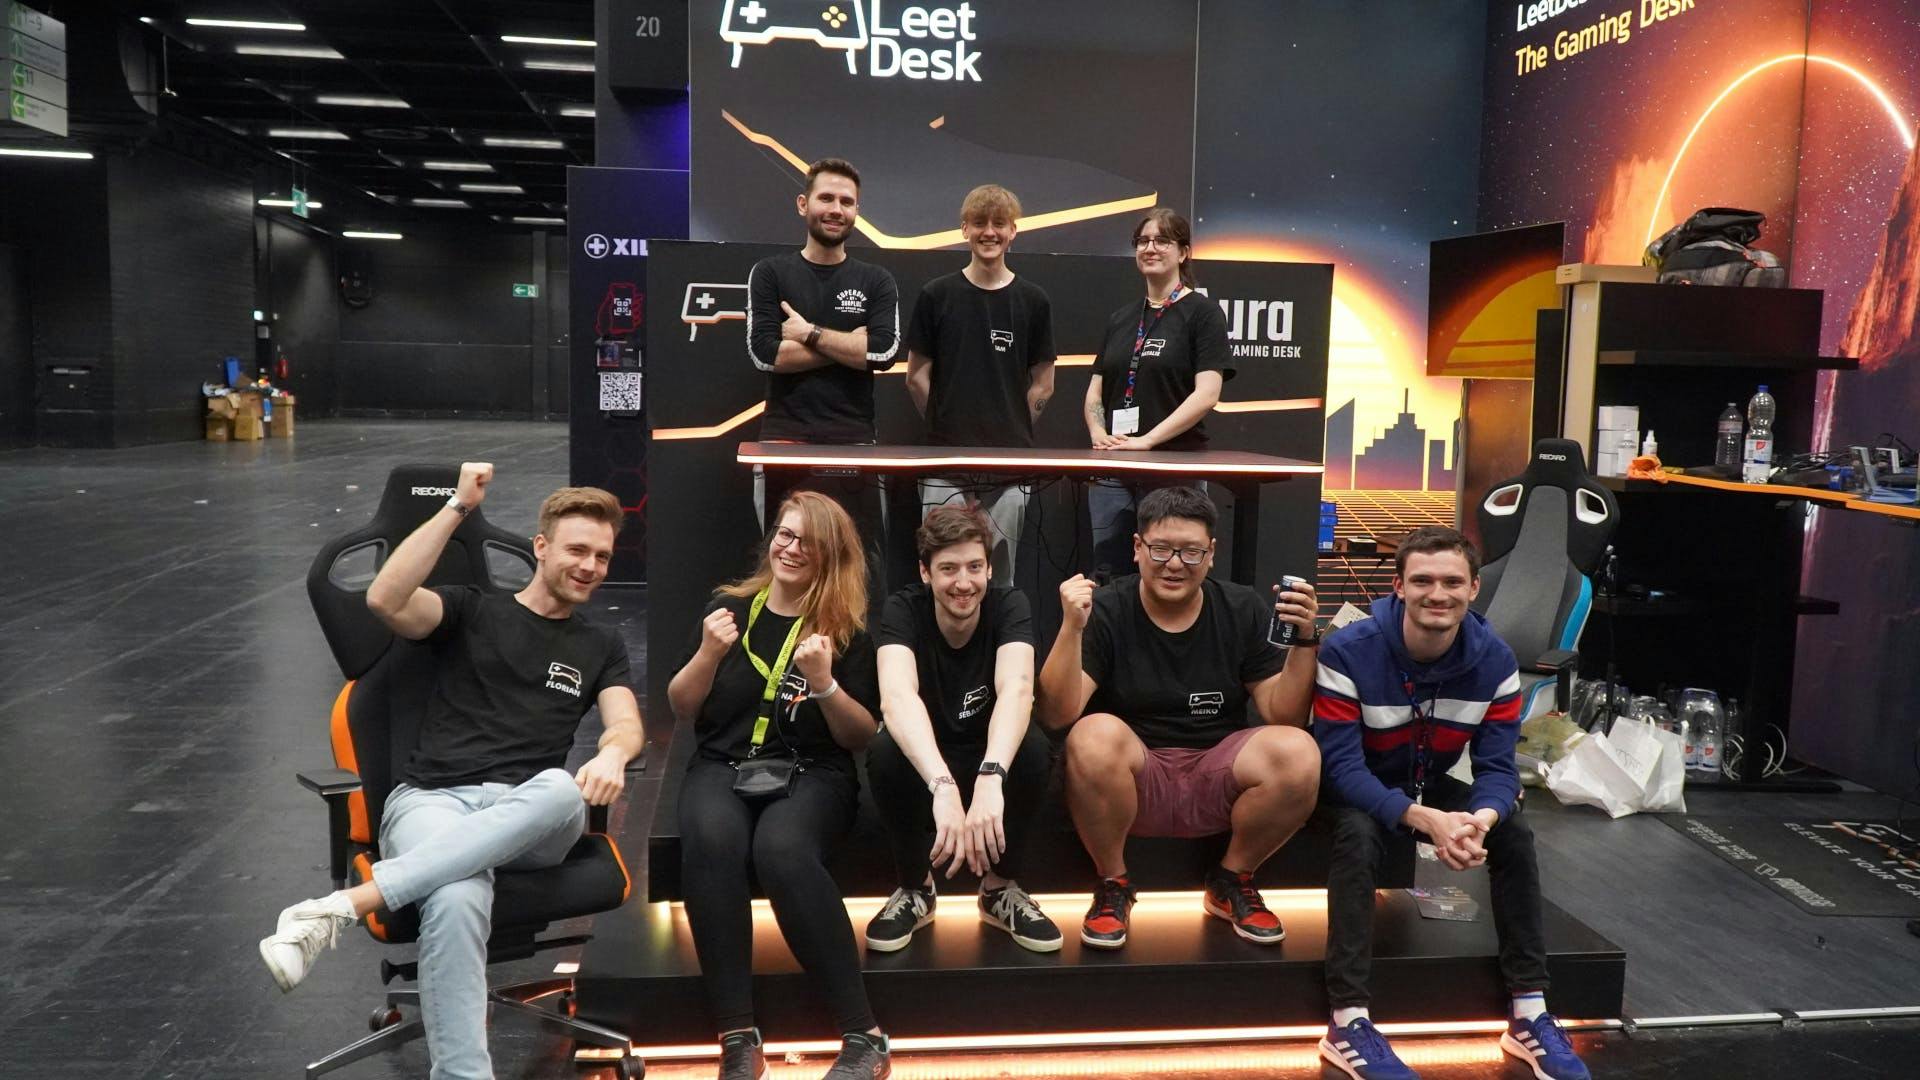 The LeetDesk Team is sitting on their Gamescom stange in front of and behind the AURA LED gaming desk, everyone is smiling.